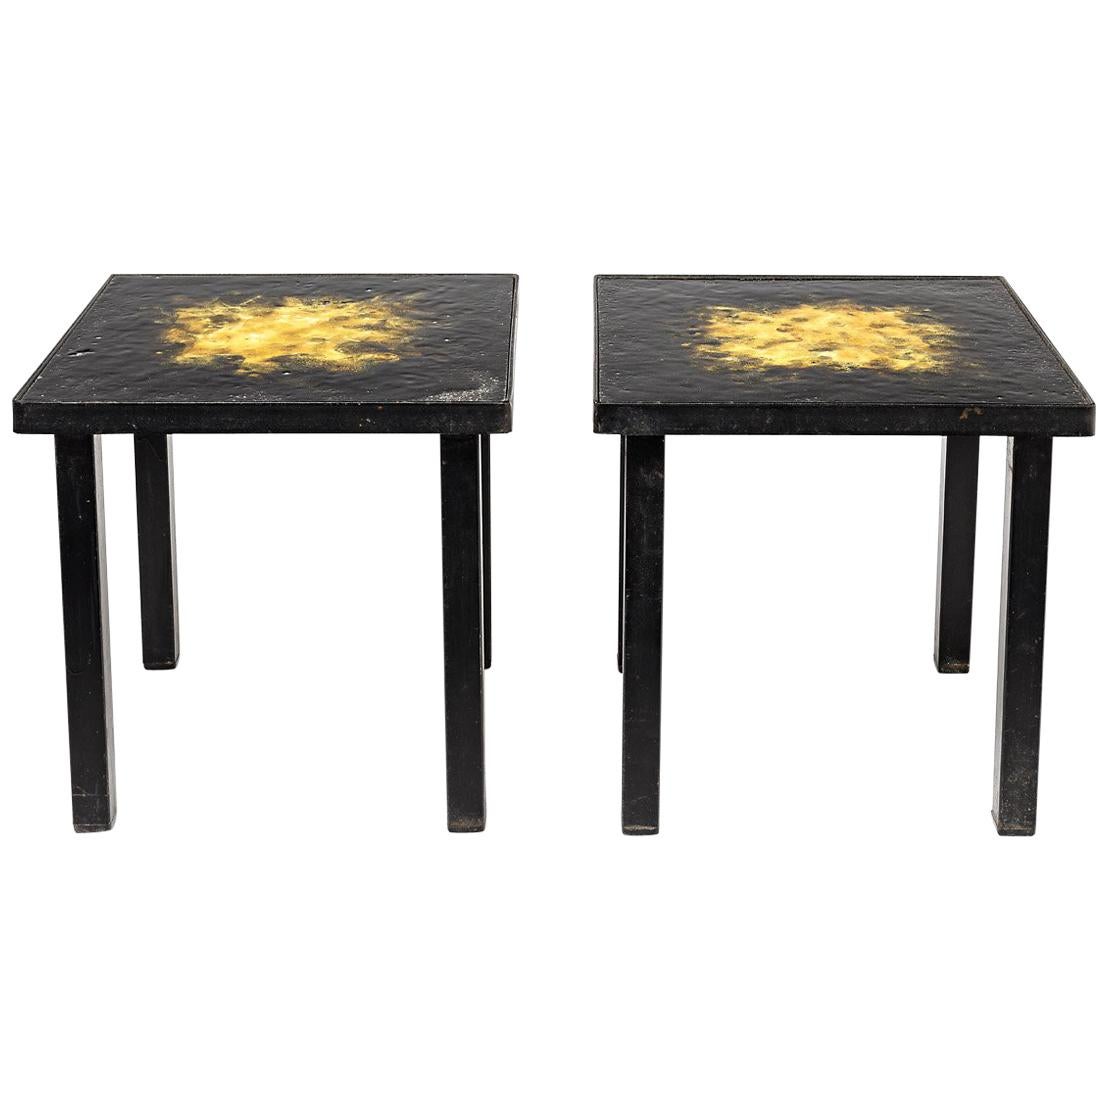 Pair of Ceramic Low Coffee Tables Shinny Black and Yellow, circa 1970 For Sale